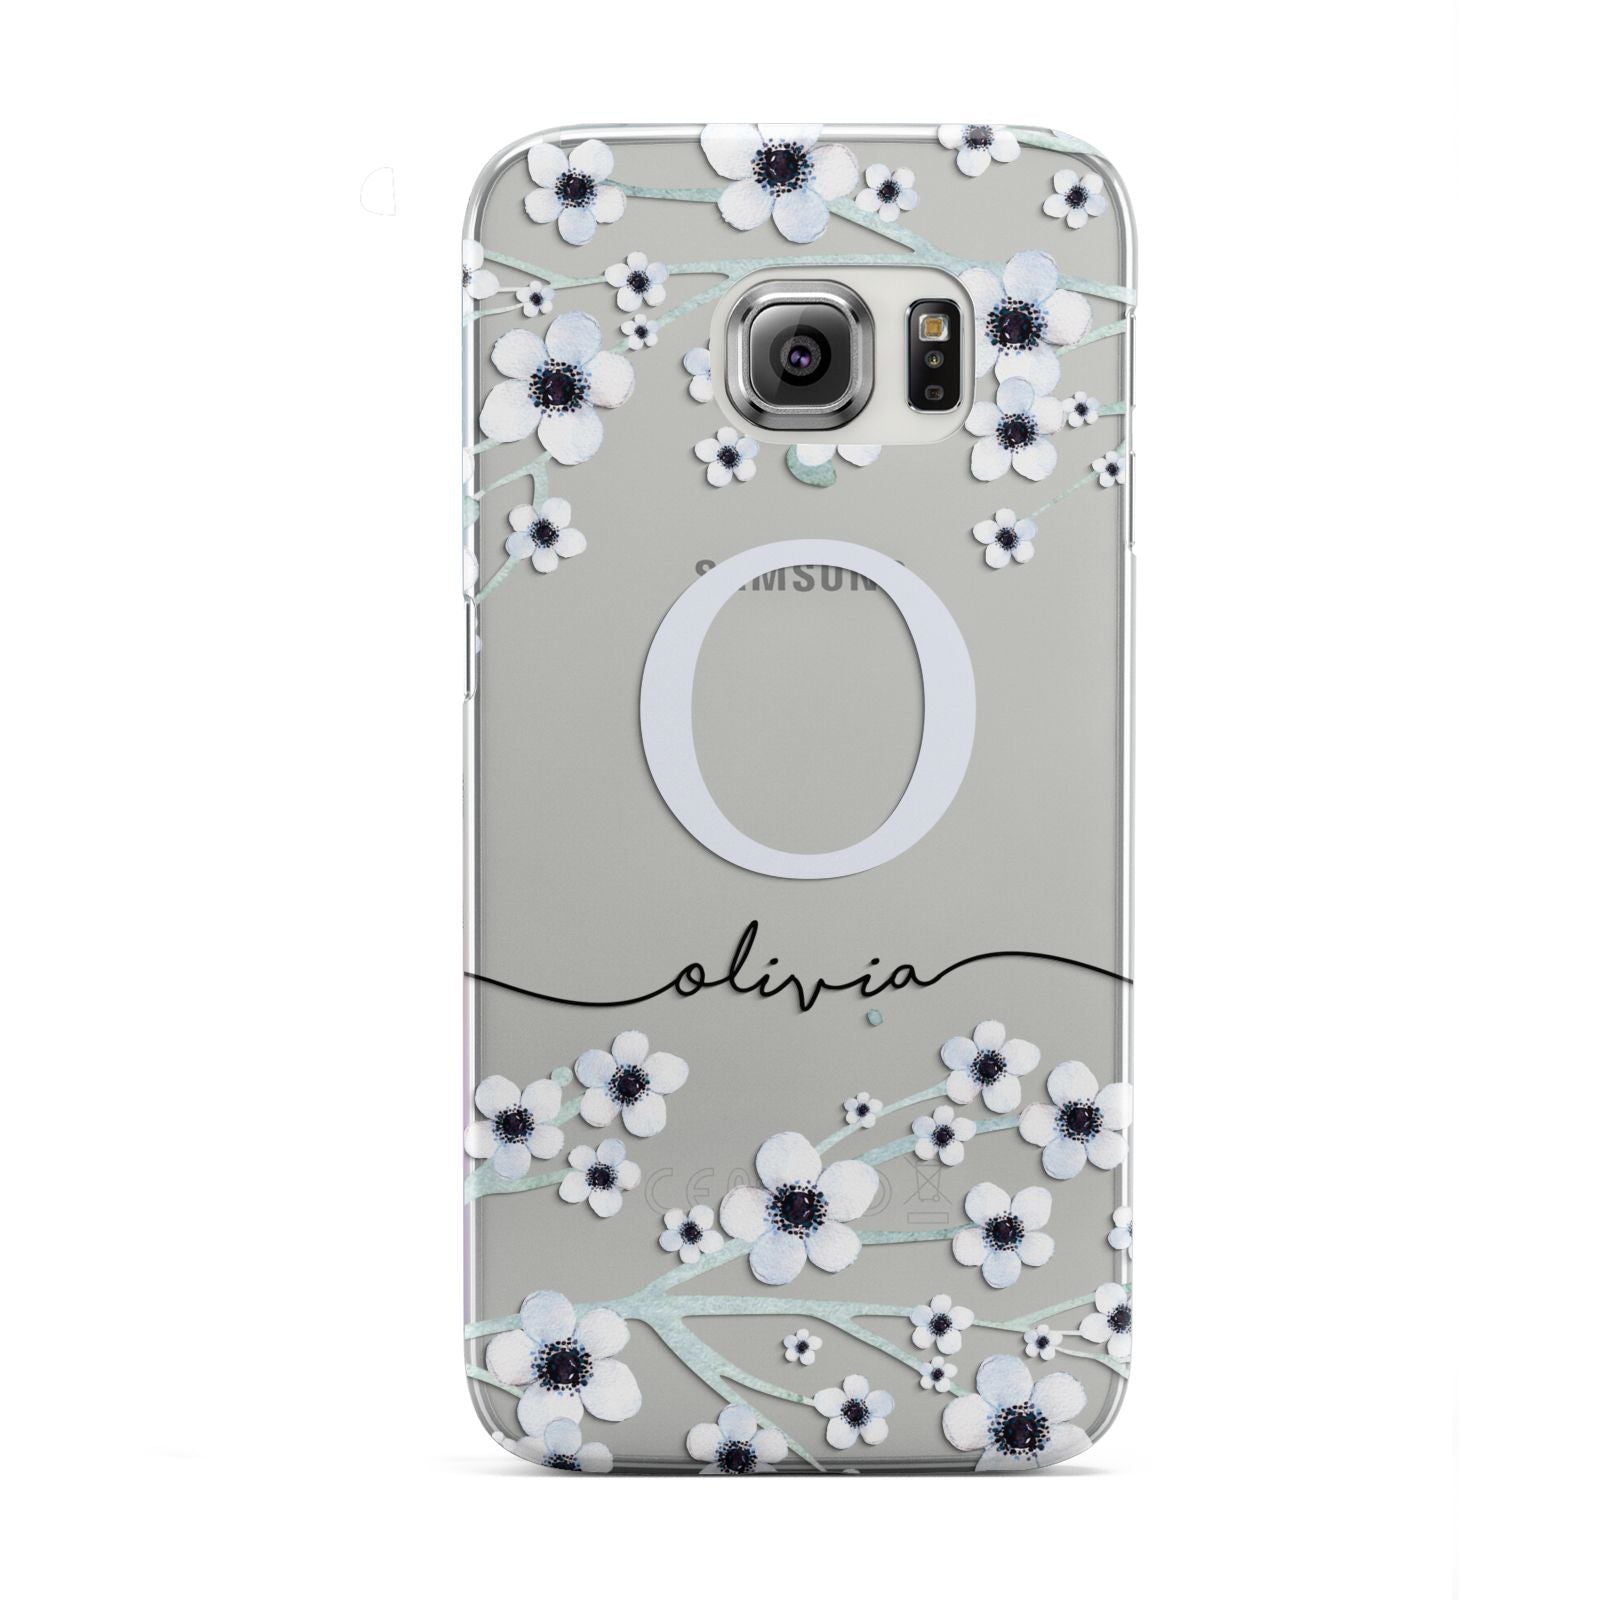 Personalised White Flower Samsung Galaxy S6 Edge Case